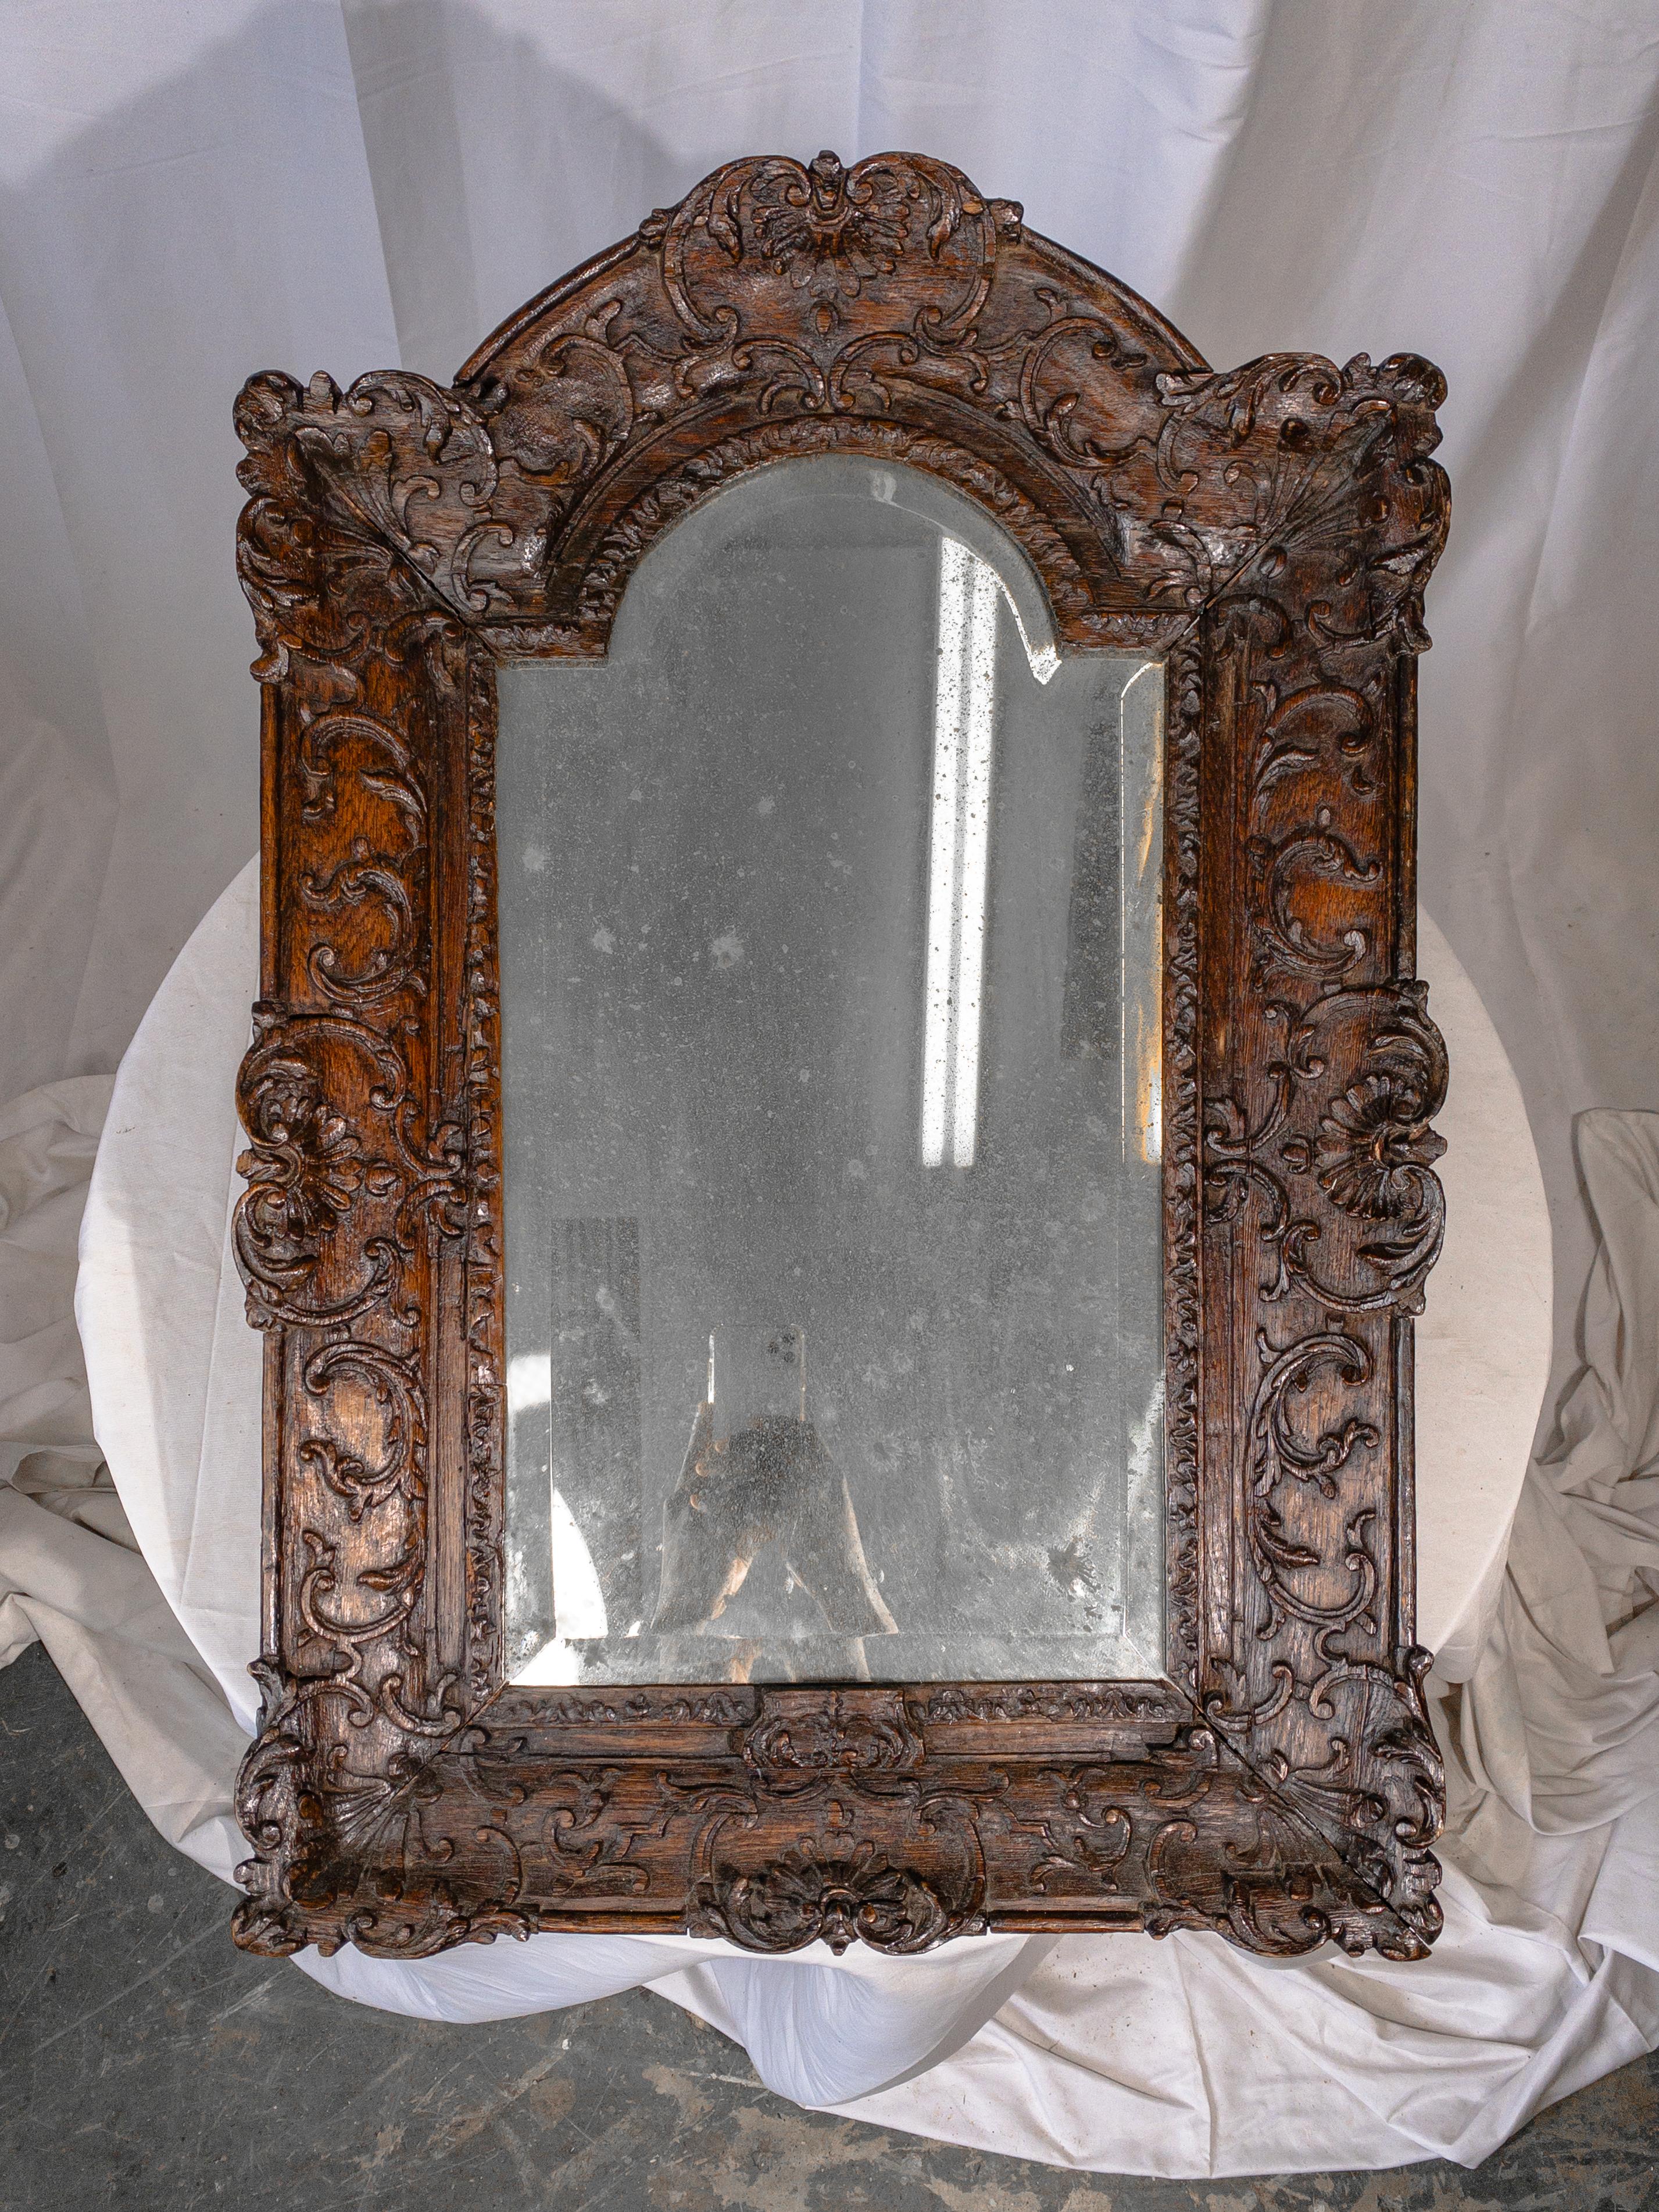 This 18th-century foxed mirror, nestled within a meticulously hand-carved wooden frame, epitomizes the elegance and craftsmanship of the late Renaissance period. The frame itself is a testament to artisanal skill, with intricate carvings that evoke